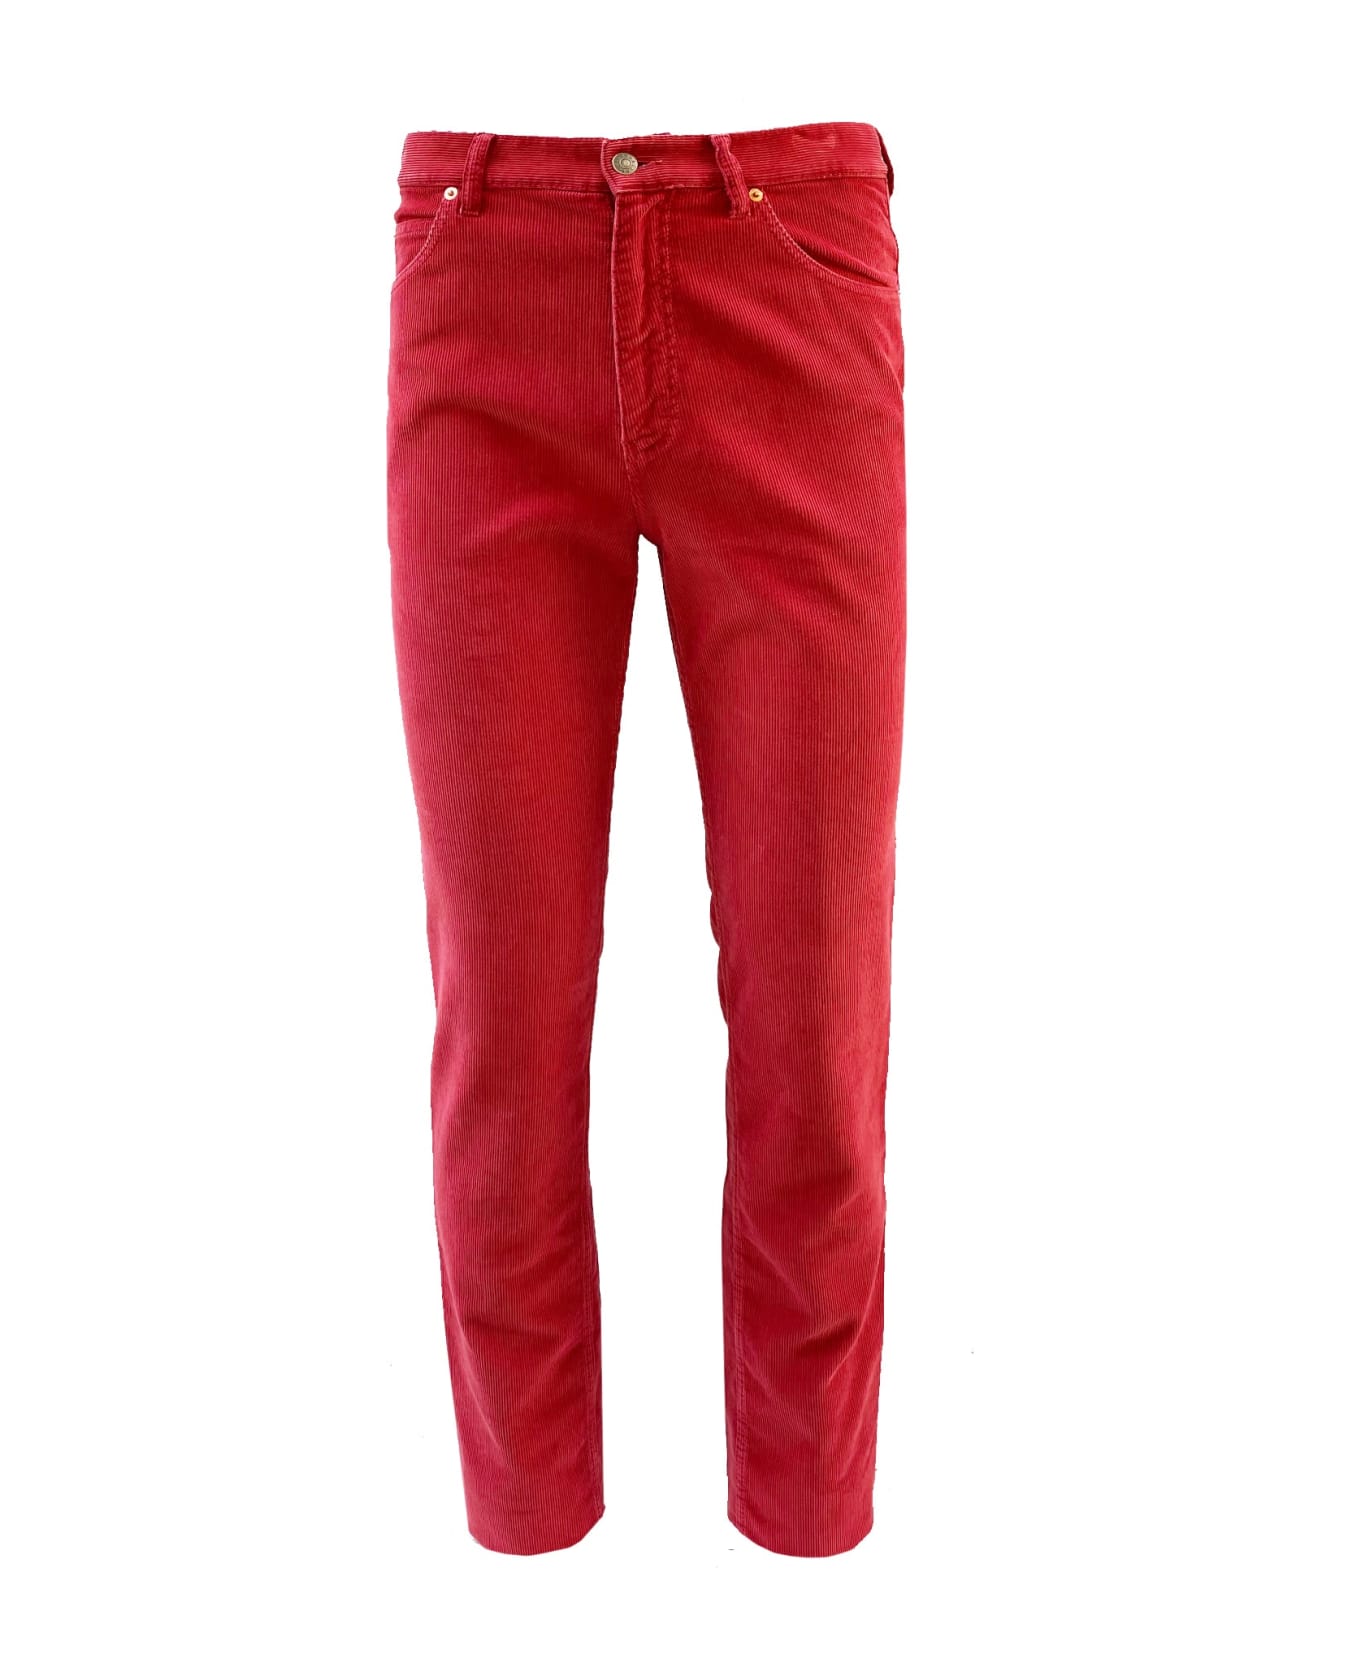 Gucci Velvet Trousers - Red